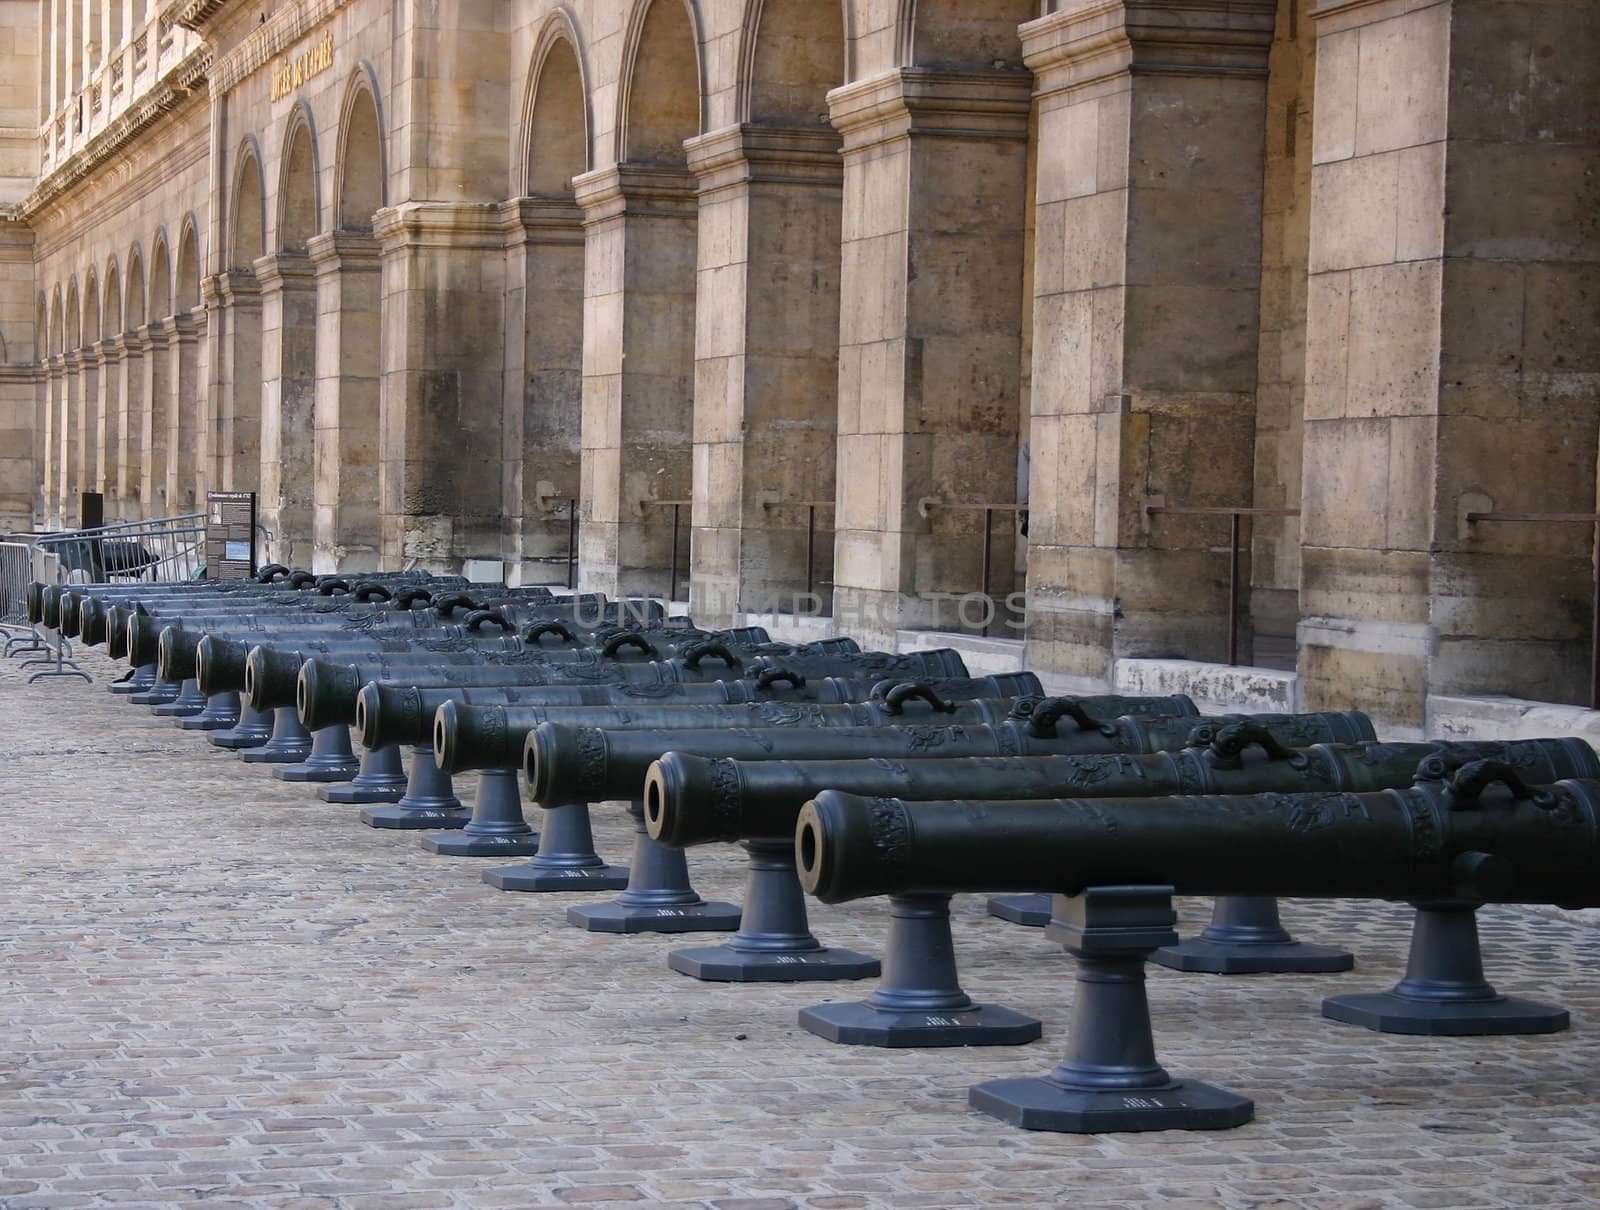  cannons on courtyard in les invalides  by artush